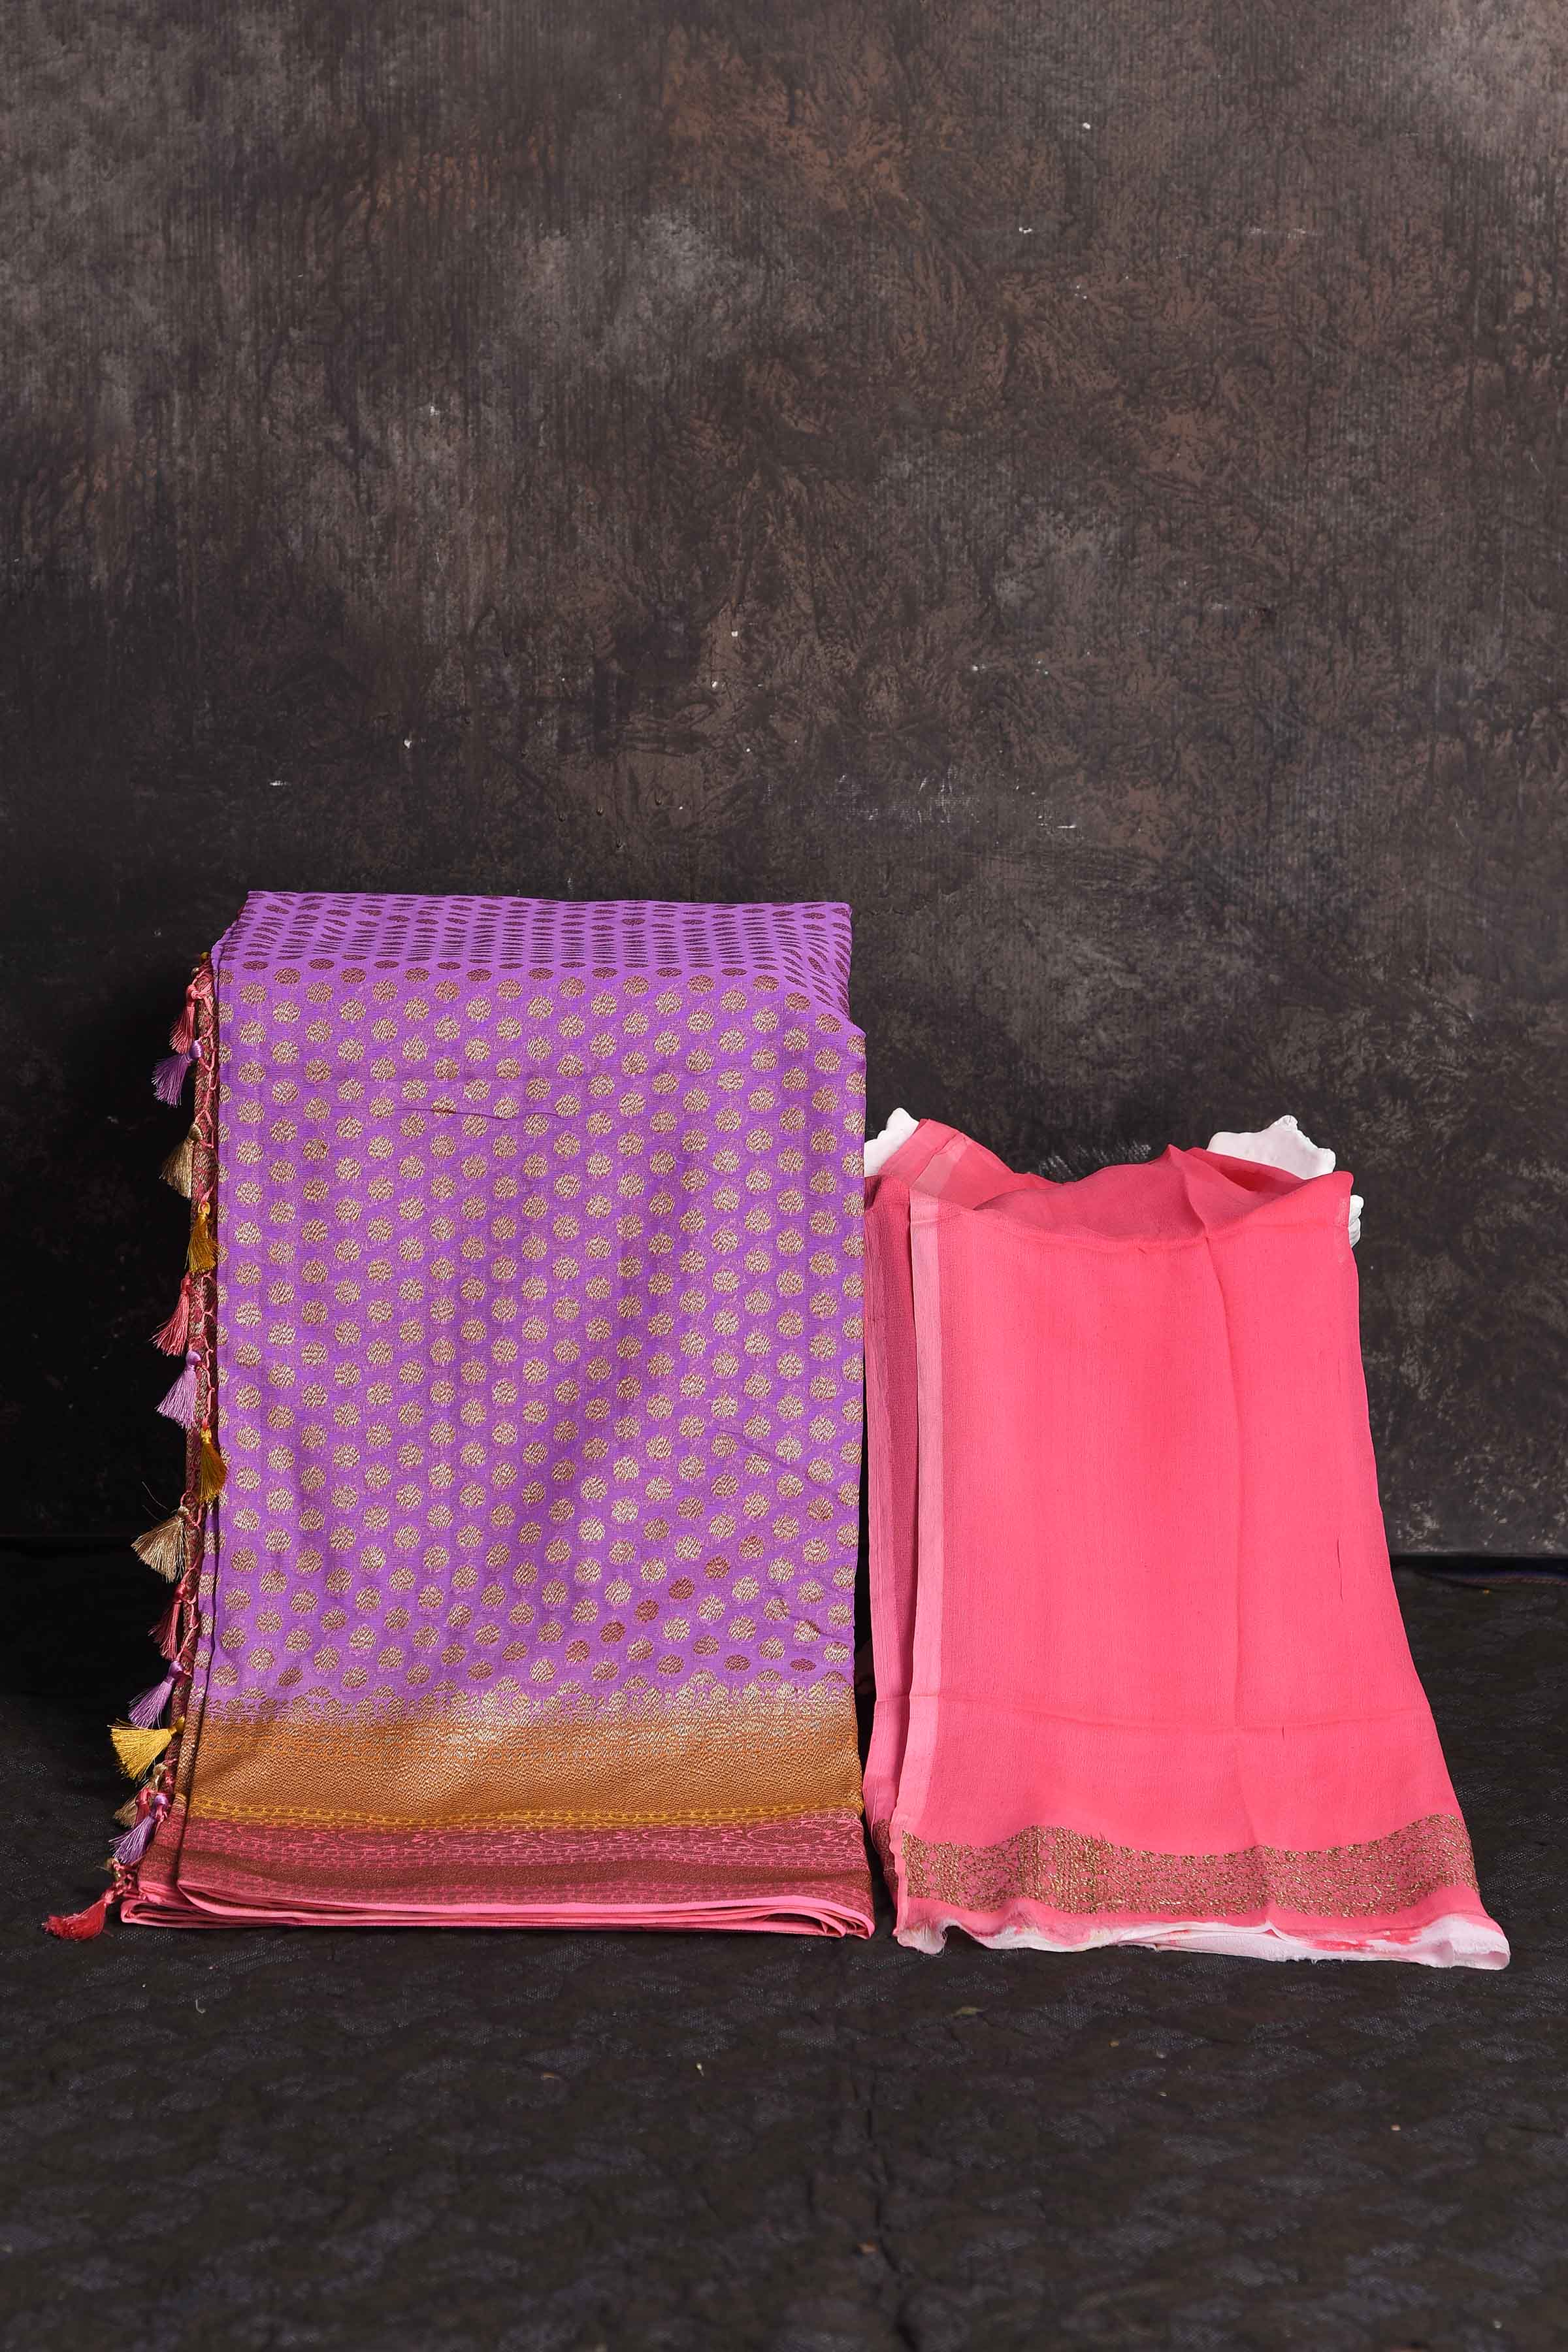 Buy beautiful lavender georgette Banarasi saree online in USA with pink and yellow border, Be a vision of ethnic elegance on festive occasions in beautiful designer sarees, silk sarees, handloom sarees, Kanchipuram silk sarees, embroidered sarees from Pure Elegance Indian saree store in USA. -blouse